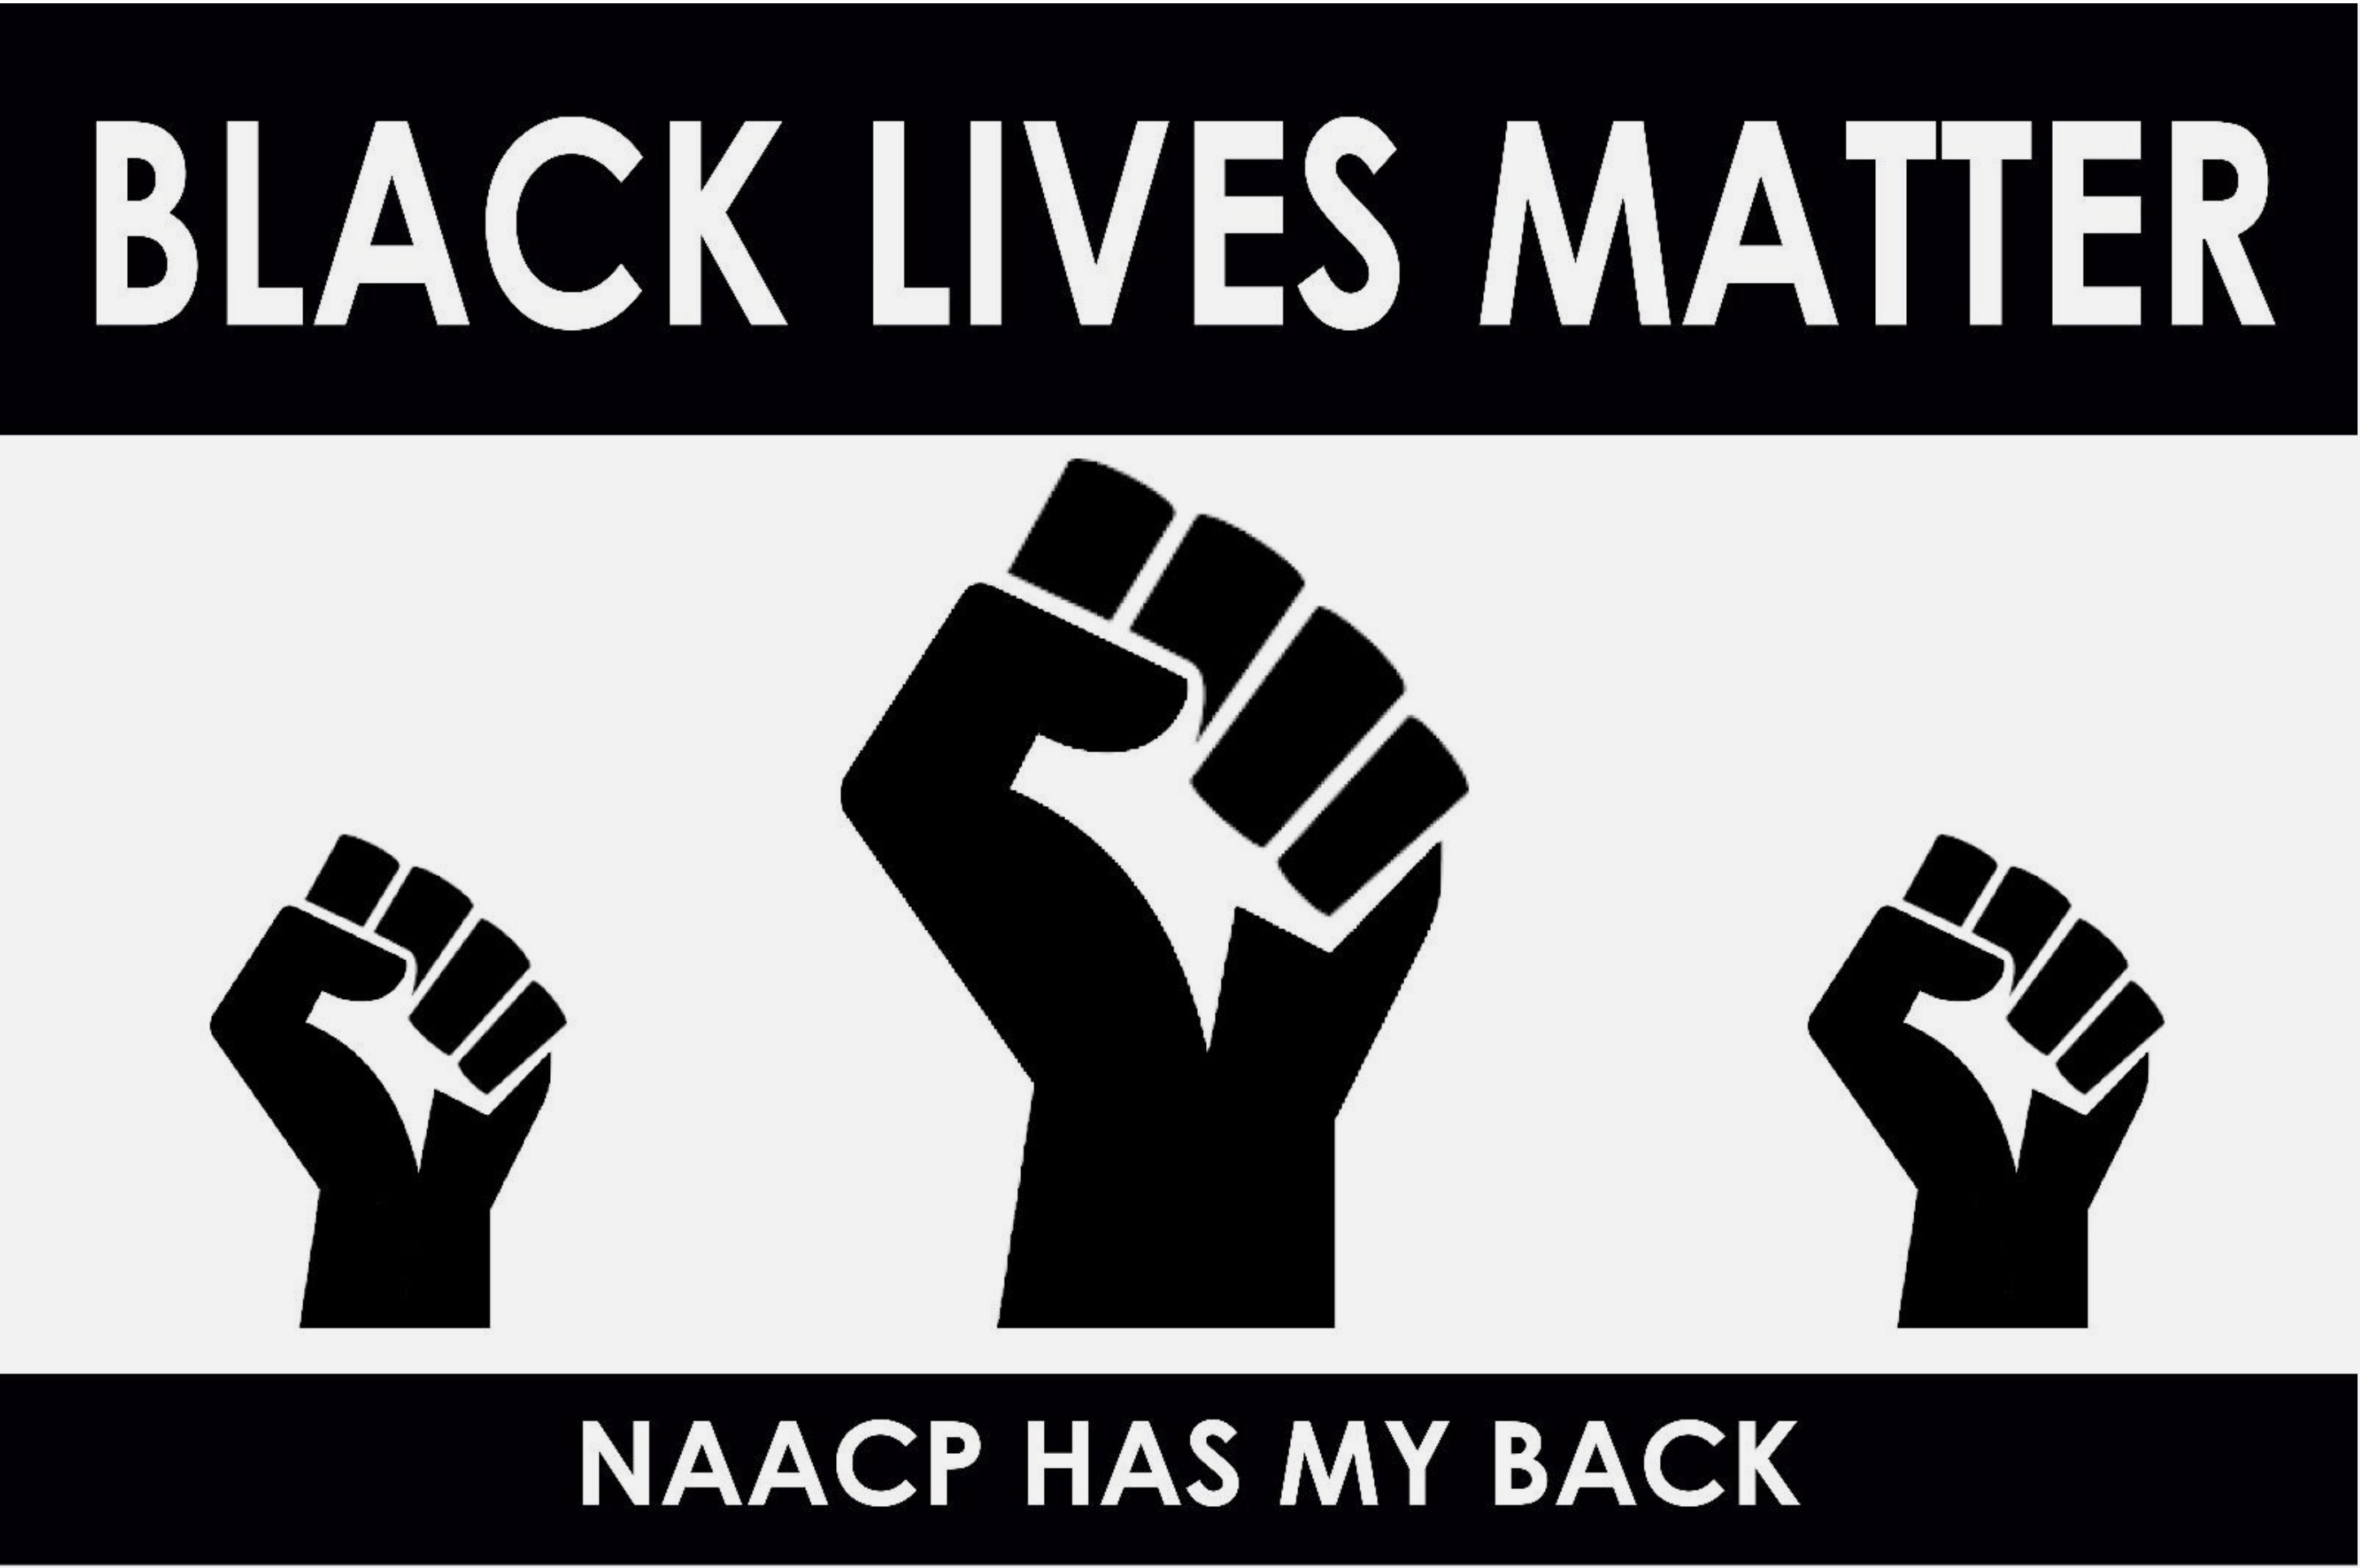 BLM/NAACP poster